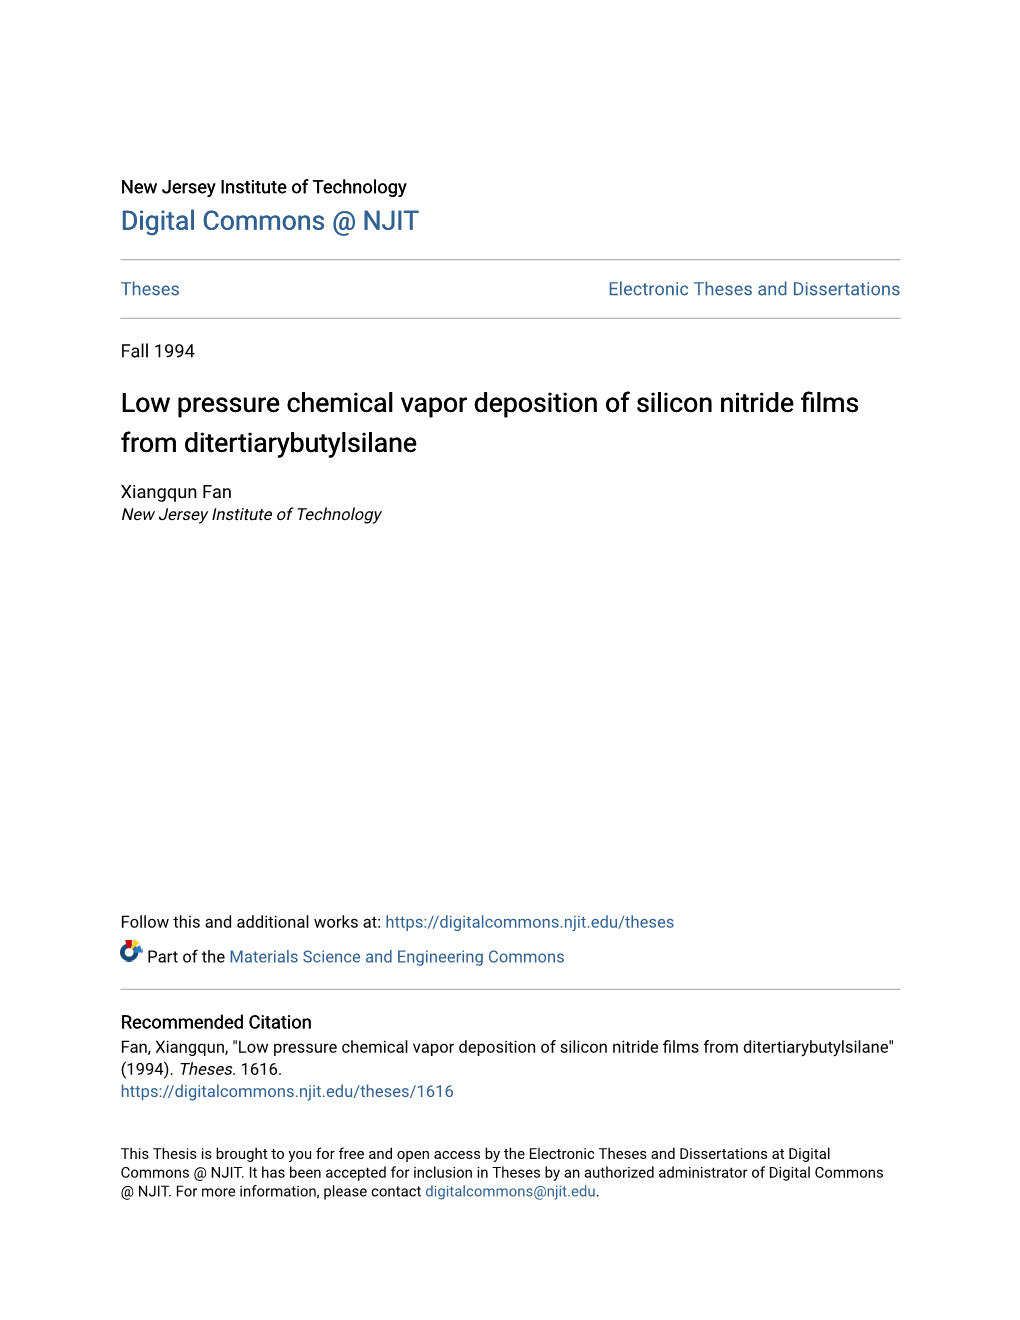 Low Pressure Chemical Vapor Deposition of Silicon Nitride Films from Ditertiarybutylsilane